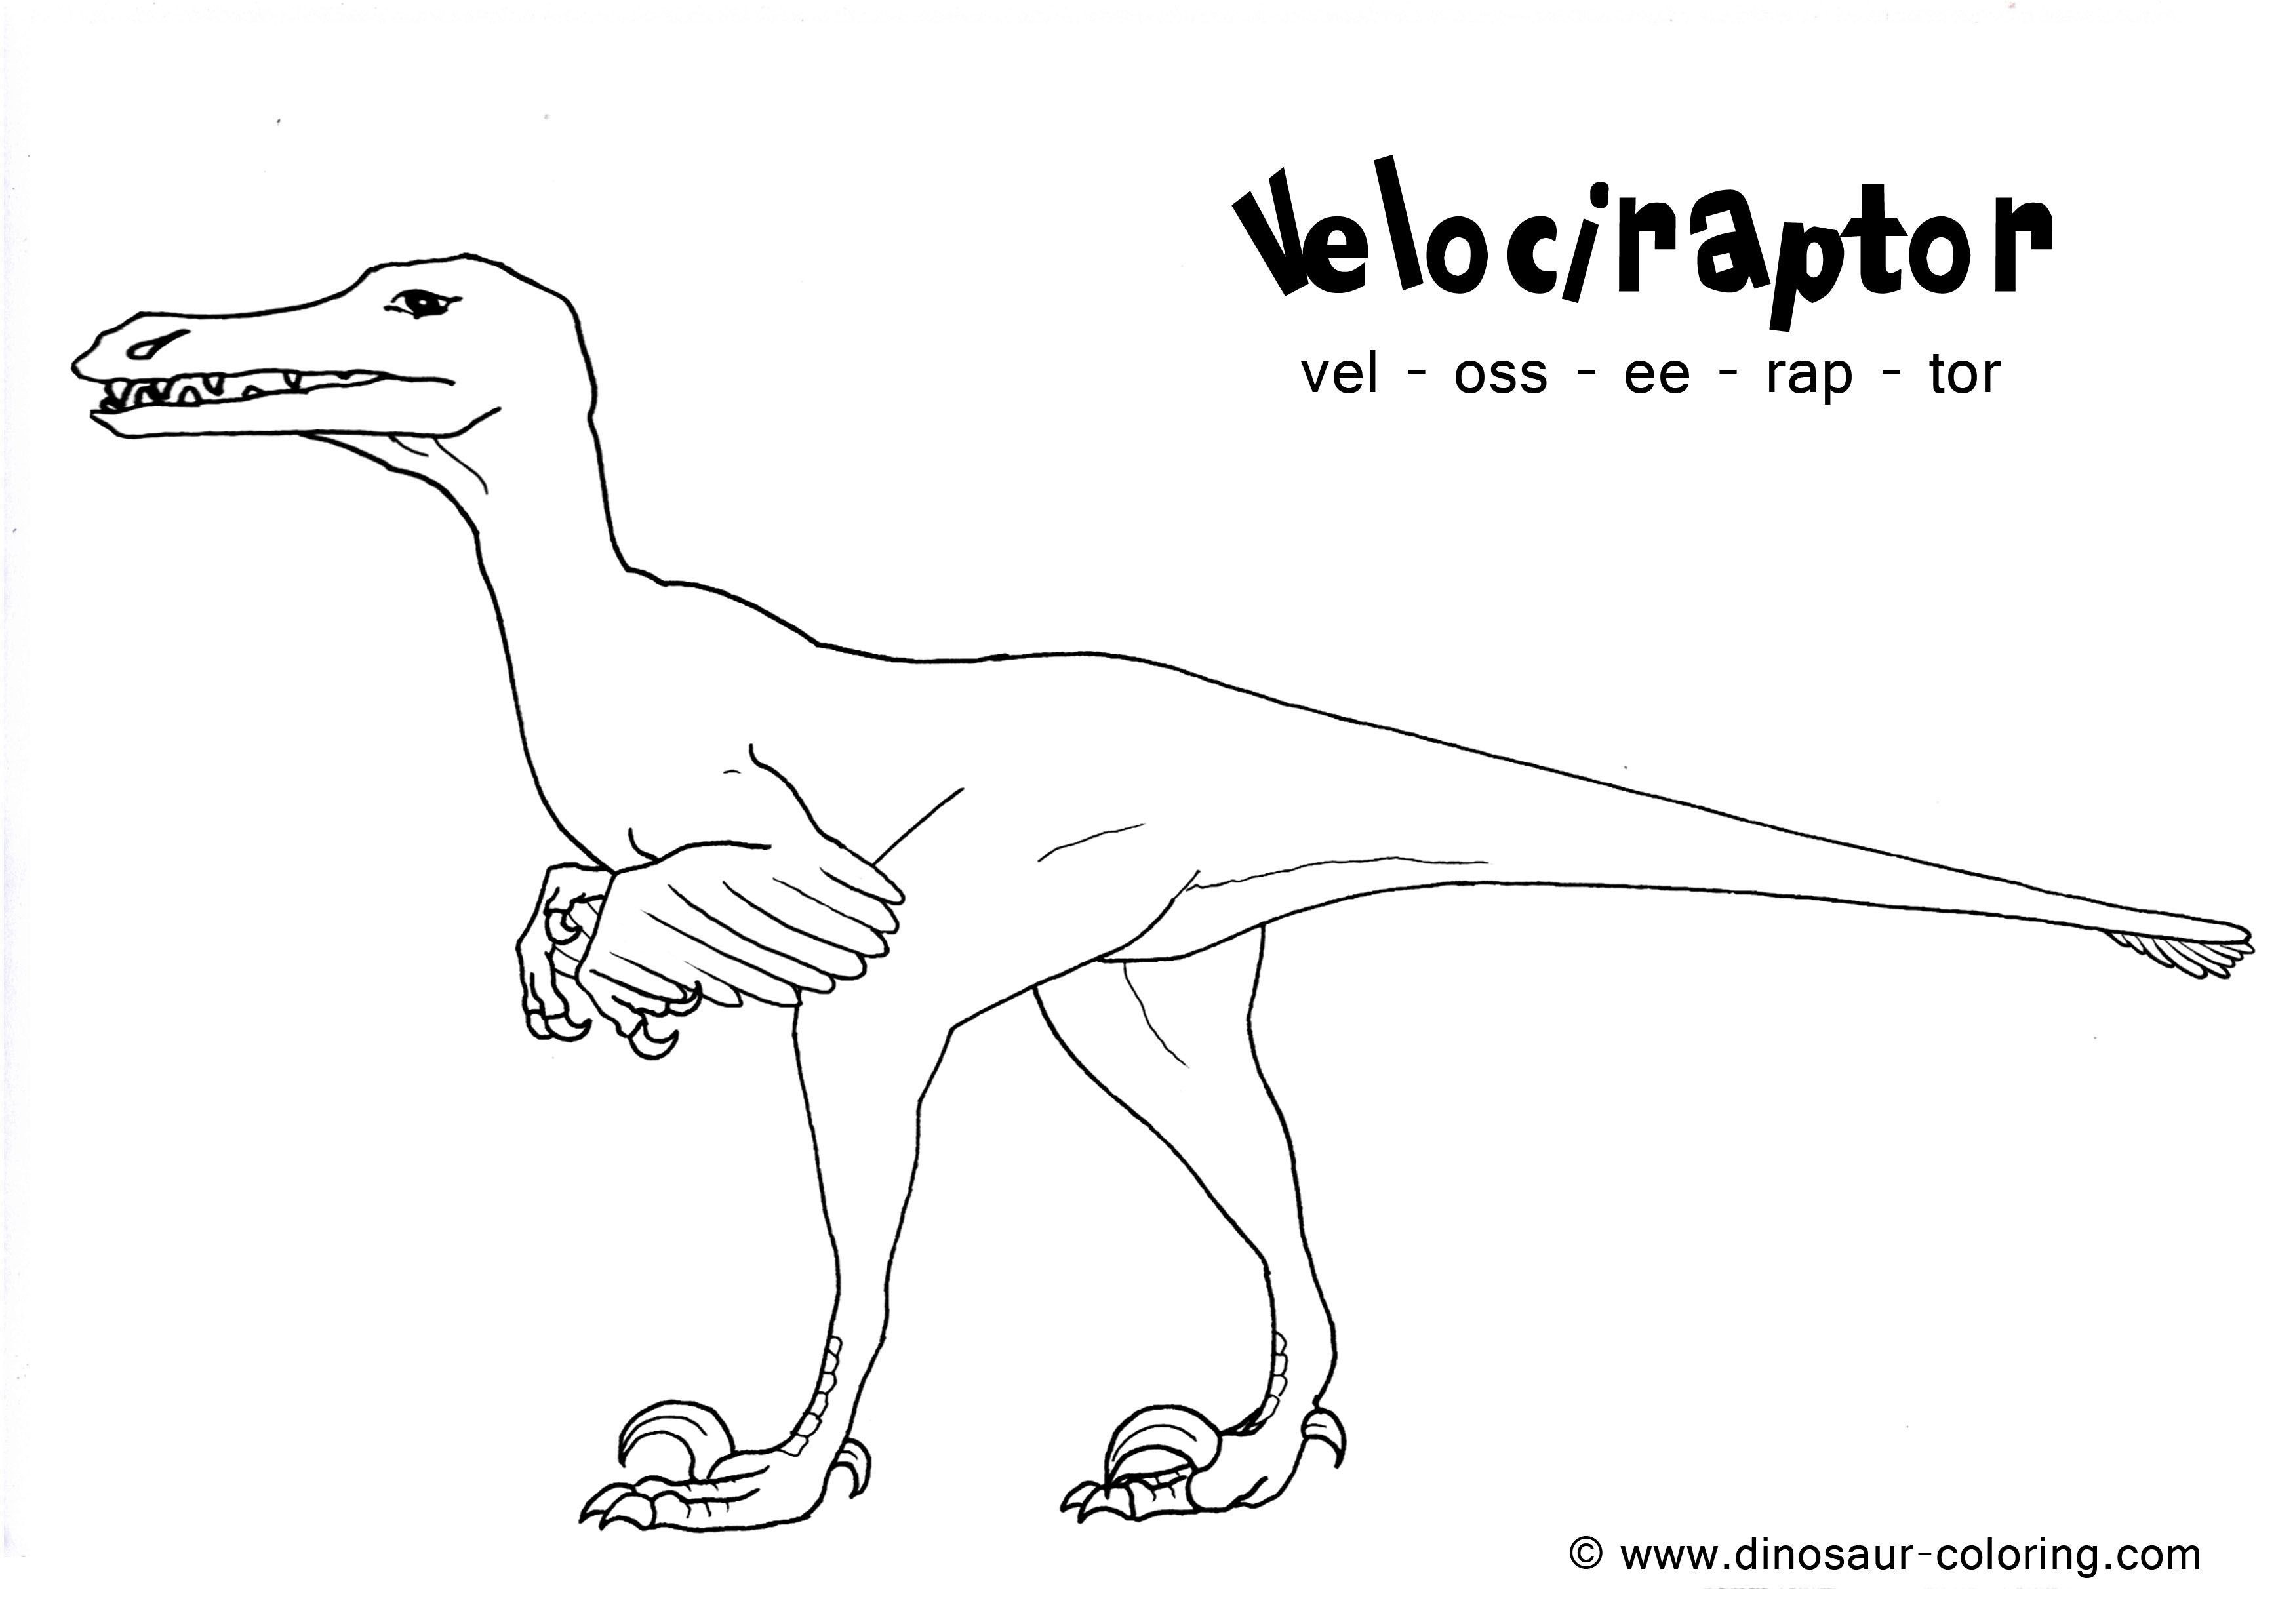 velociraptor coloring sheet dinosaur coloring page of velociraptor a carnivorous feathered dinosaur